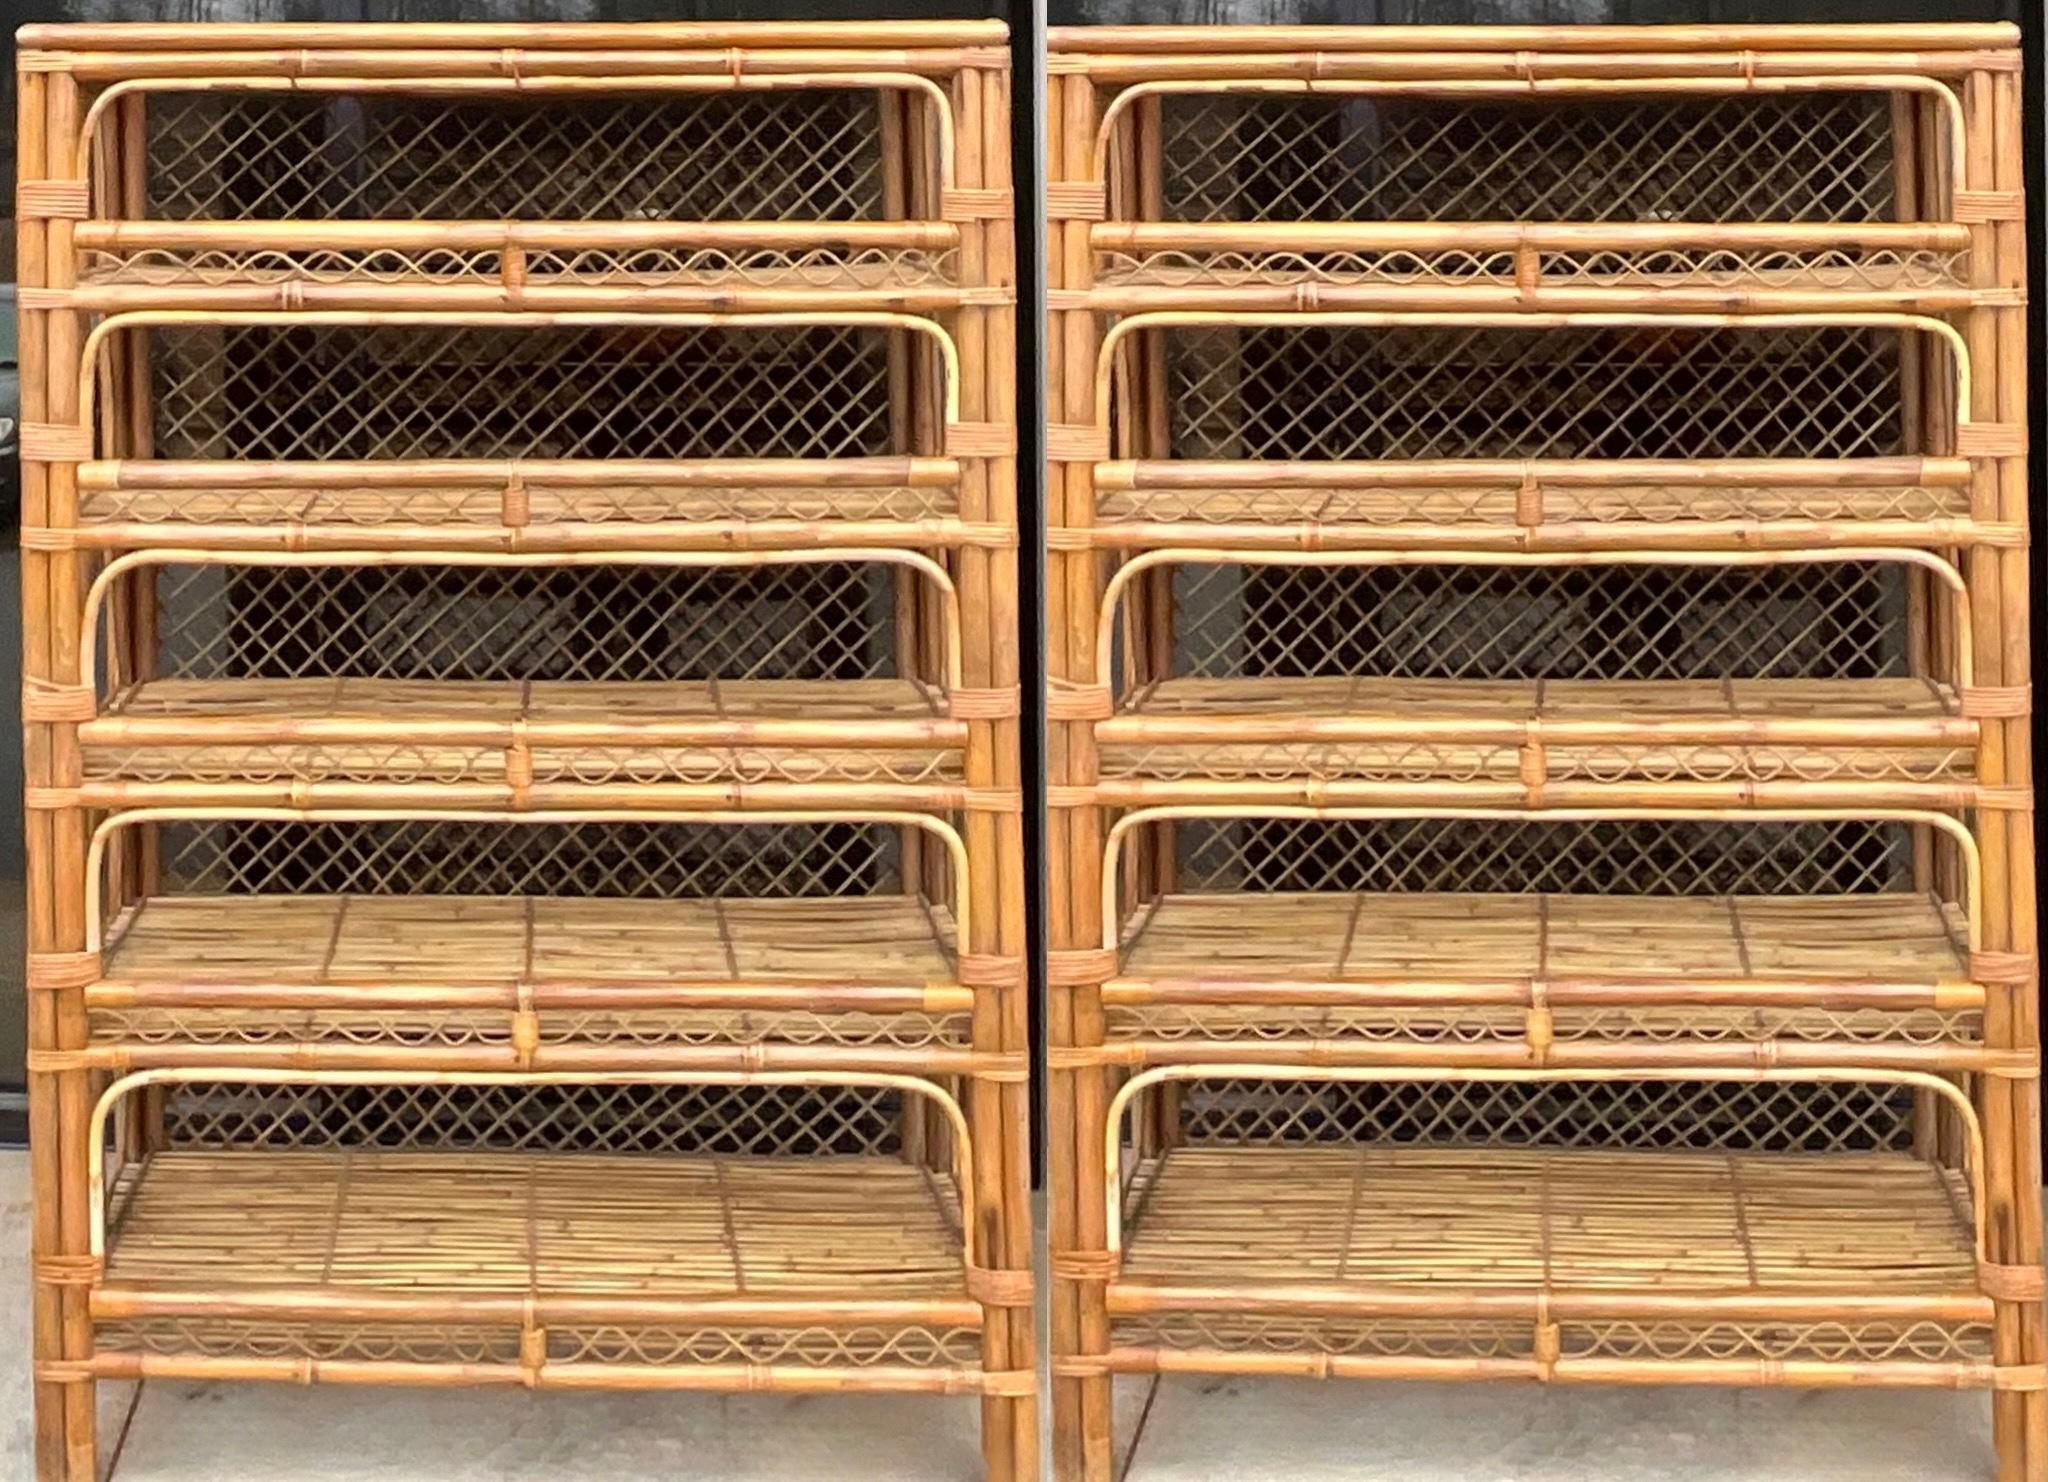 This is a pair of mid-century organic modern style bamboo shelving units.  Each unit has five shelves with approximately 9.75” between each shelf. Both shelves show the typical age wear synonymous with bamboo. They were manufactured in the